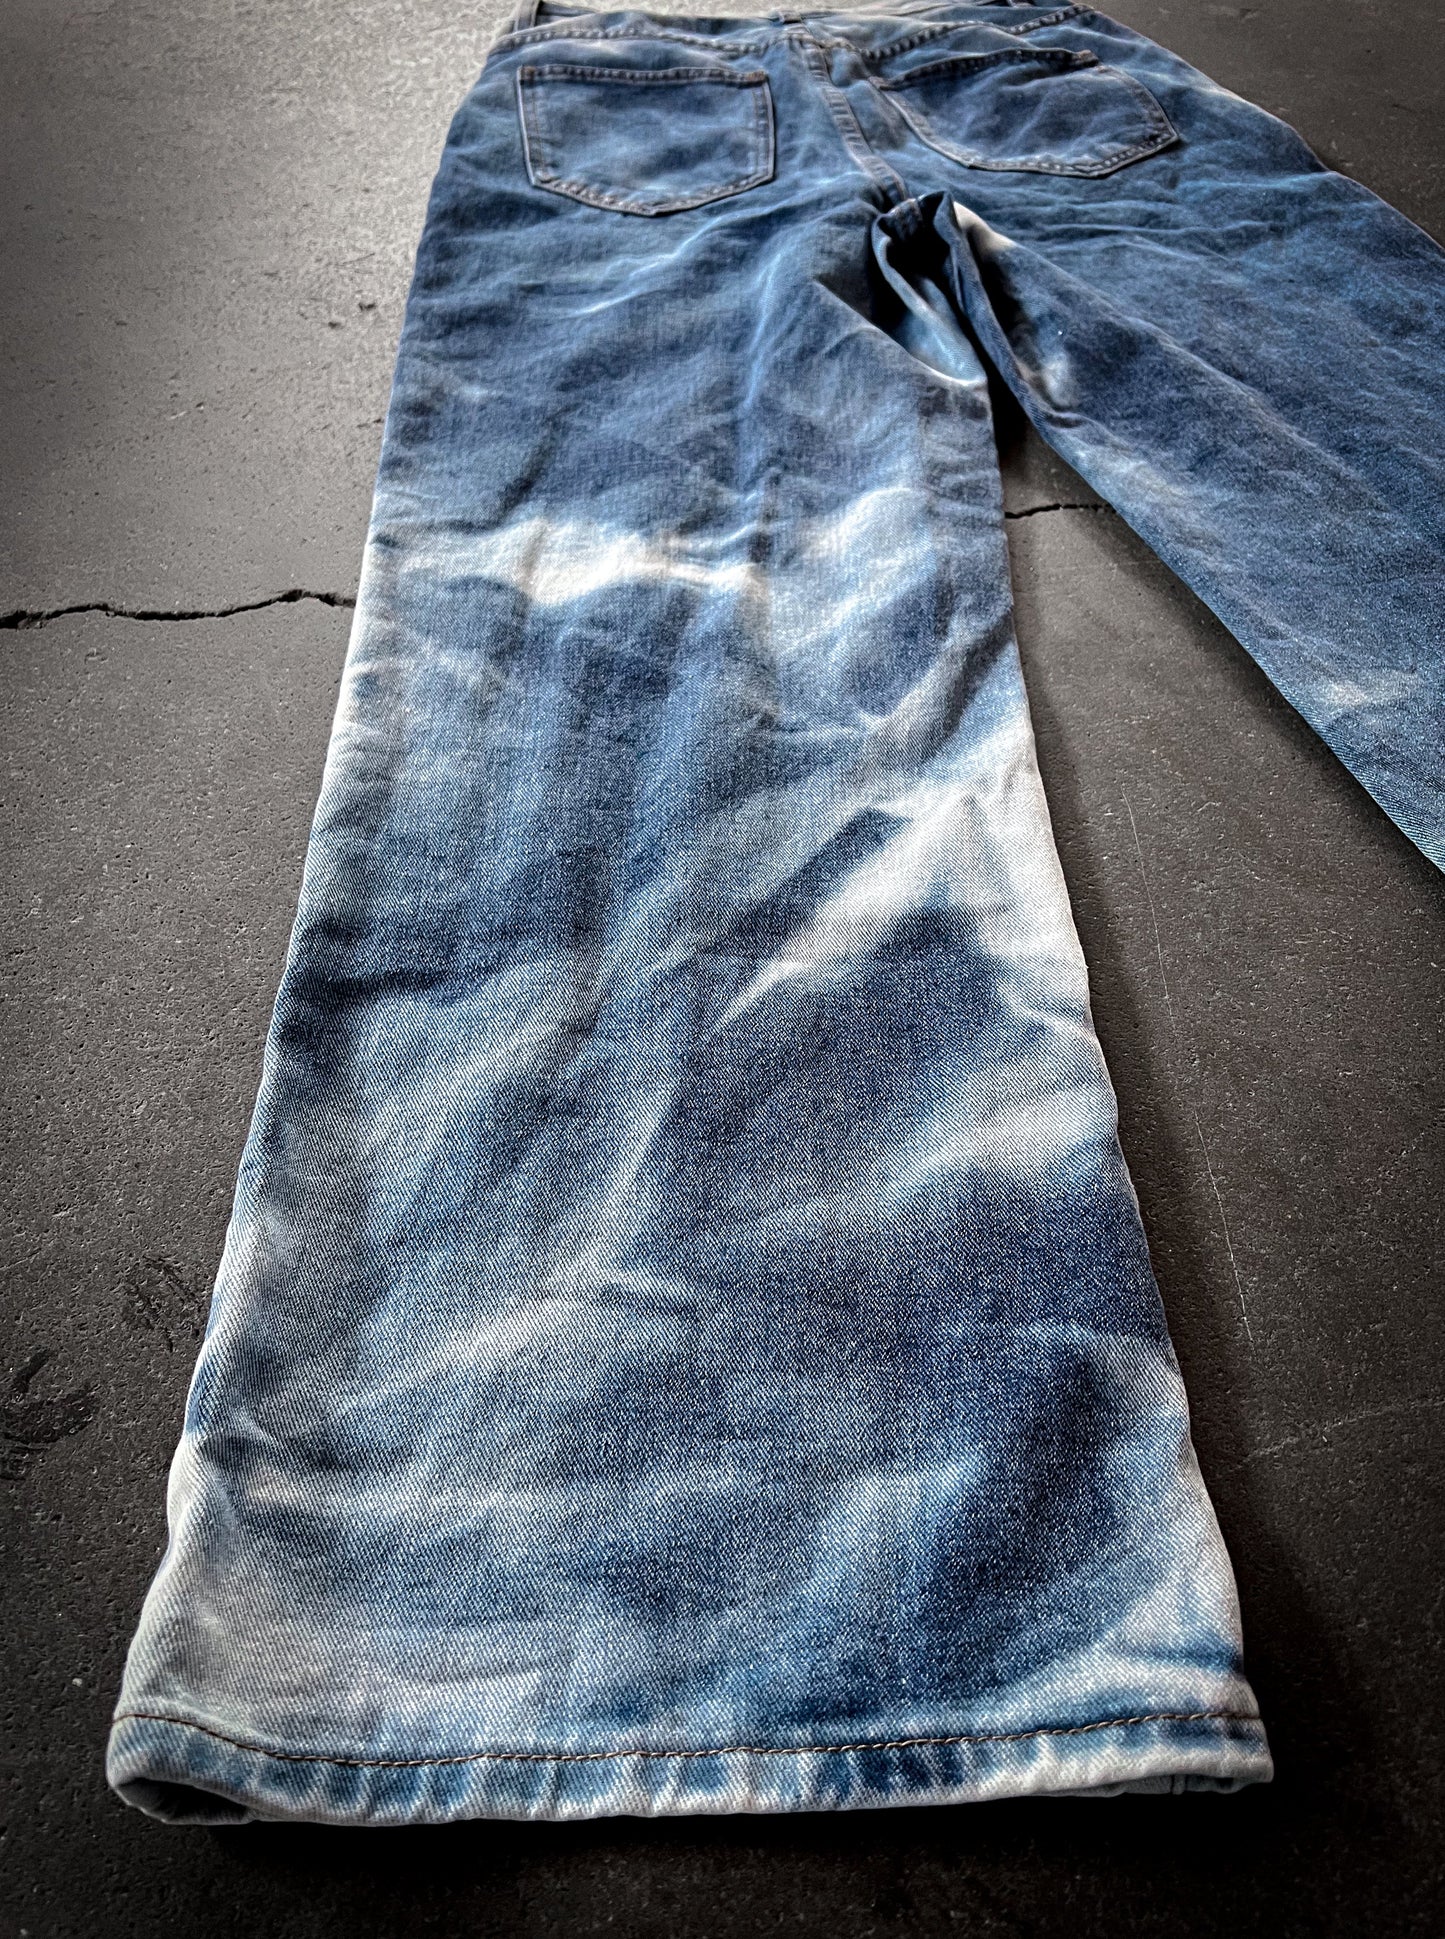 Water Bleached Jeans (#10)